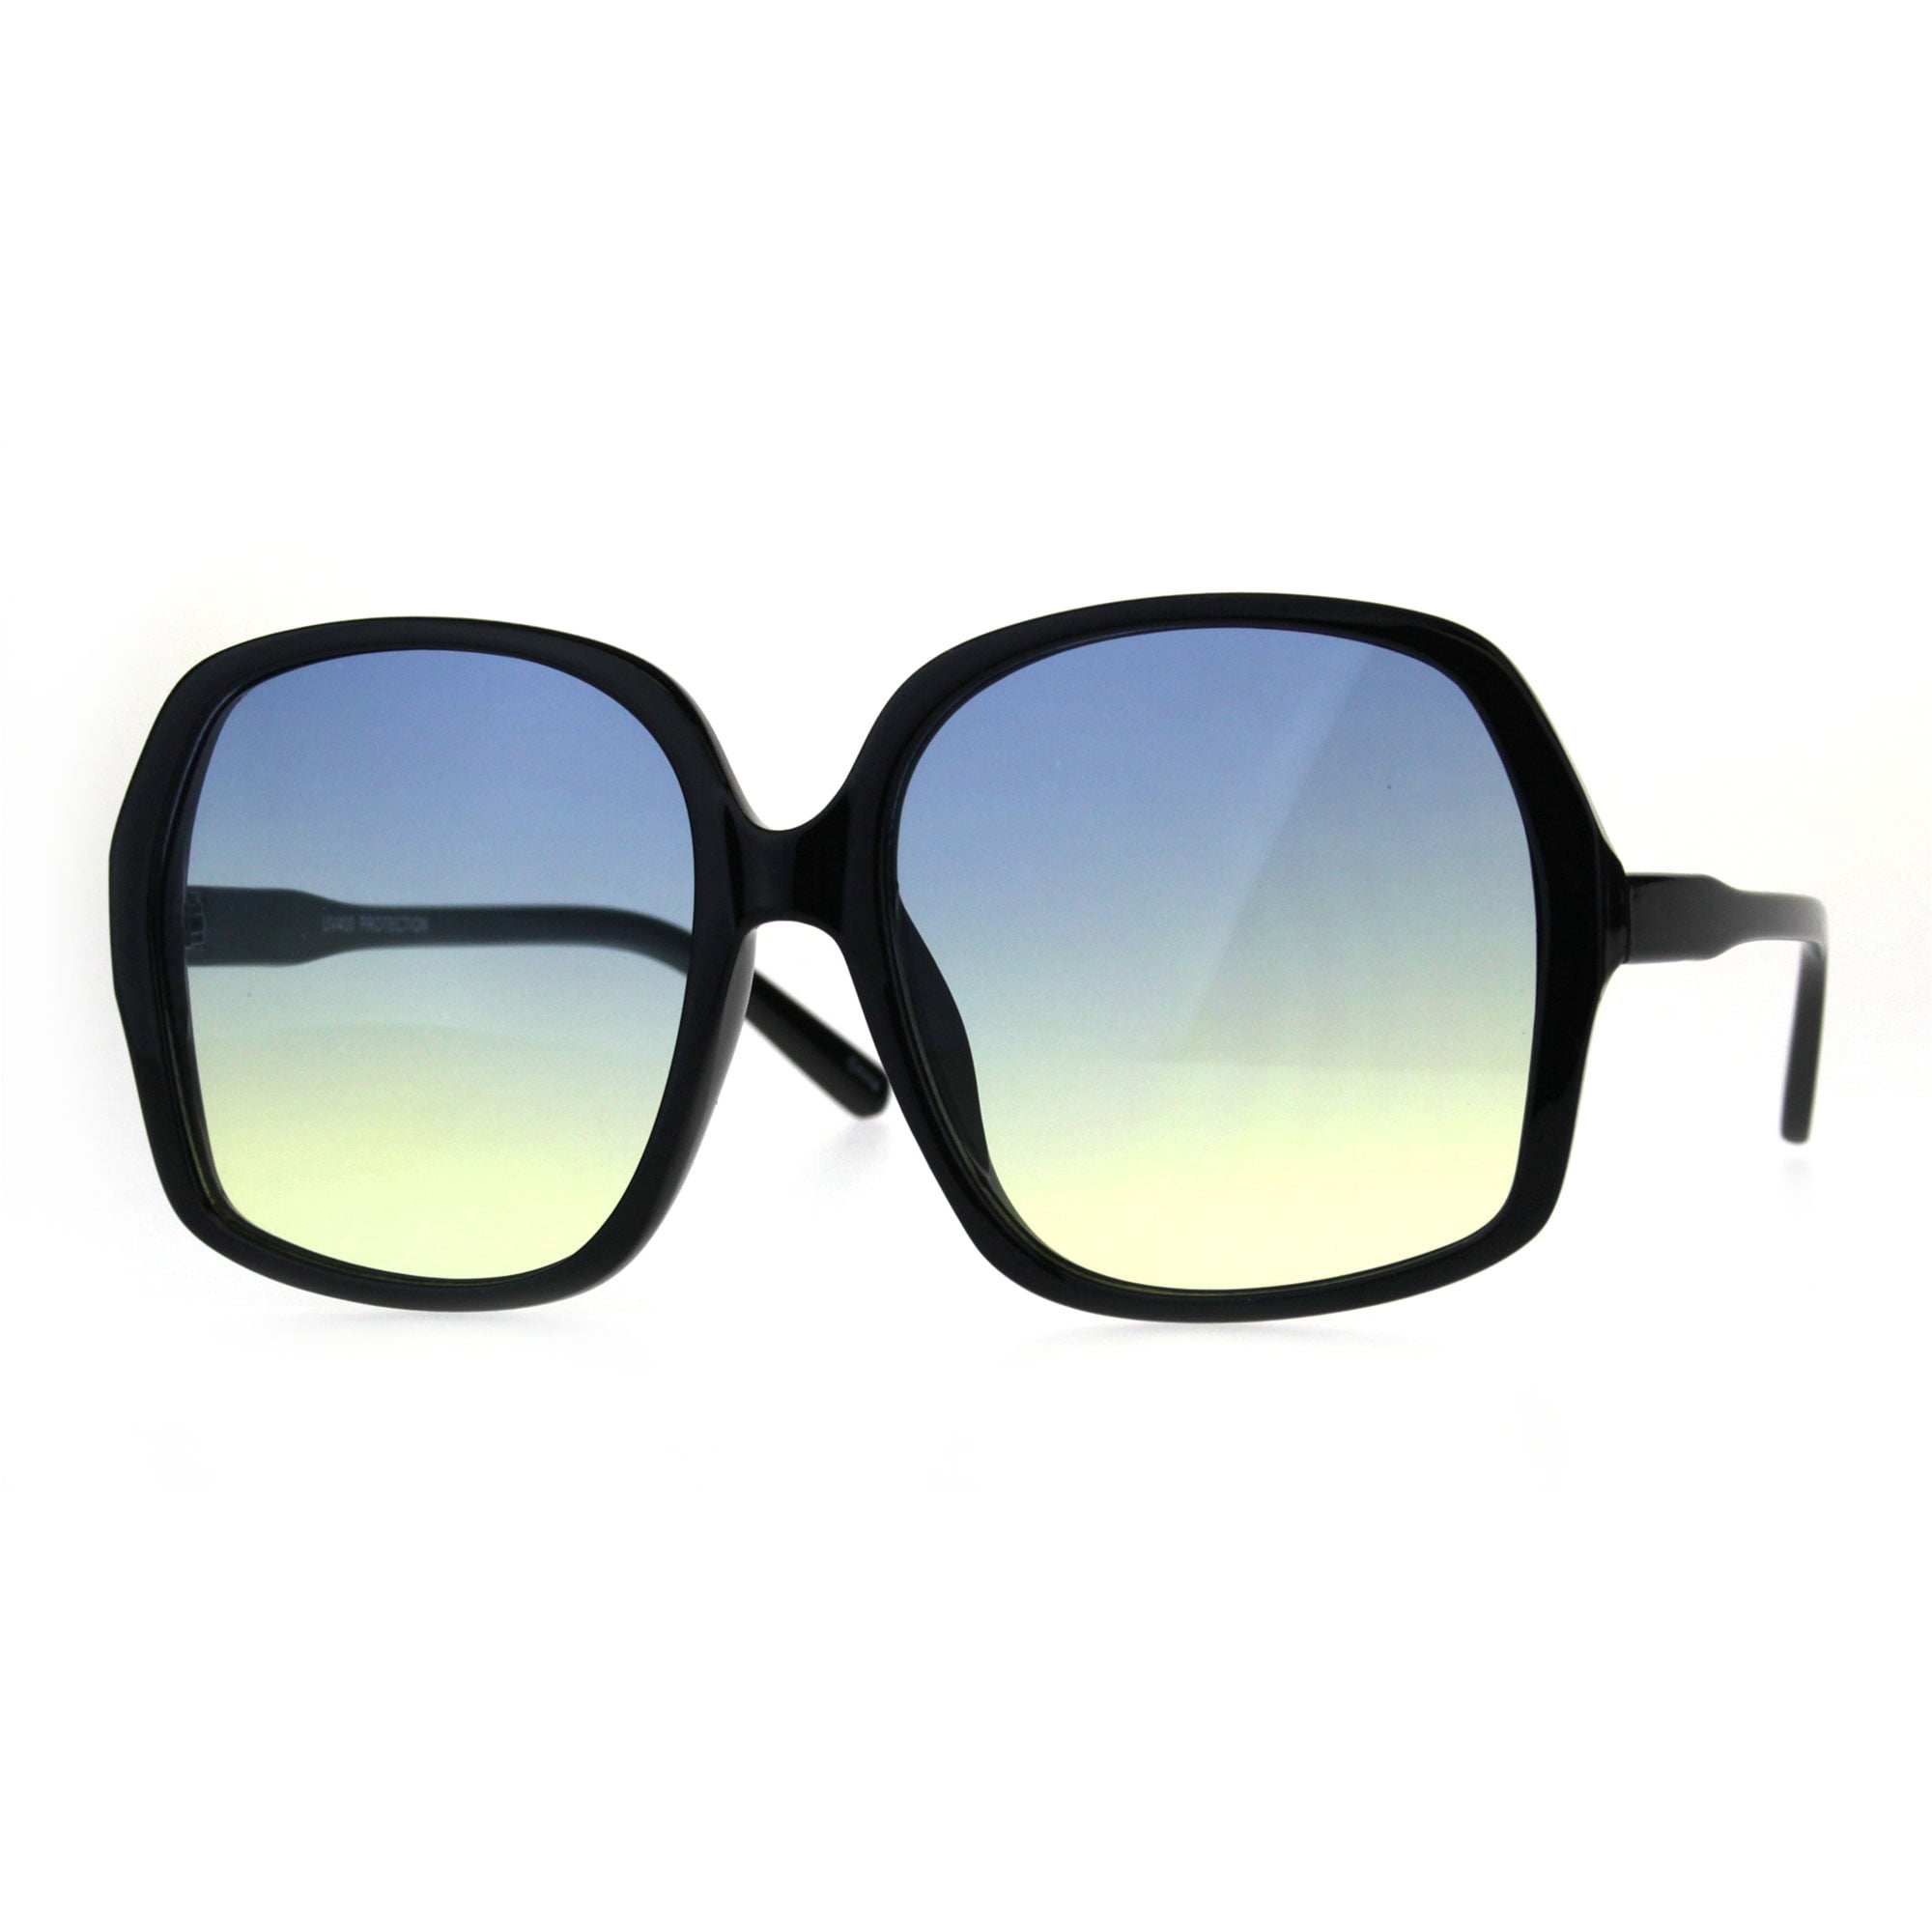 Givenchy - Sunglasses Round Oversize Silhouette in Optyl - Blue Brown -  Sunglasses - Givenchy Eyewear - Avvenice